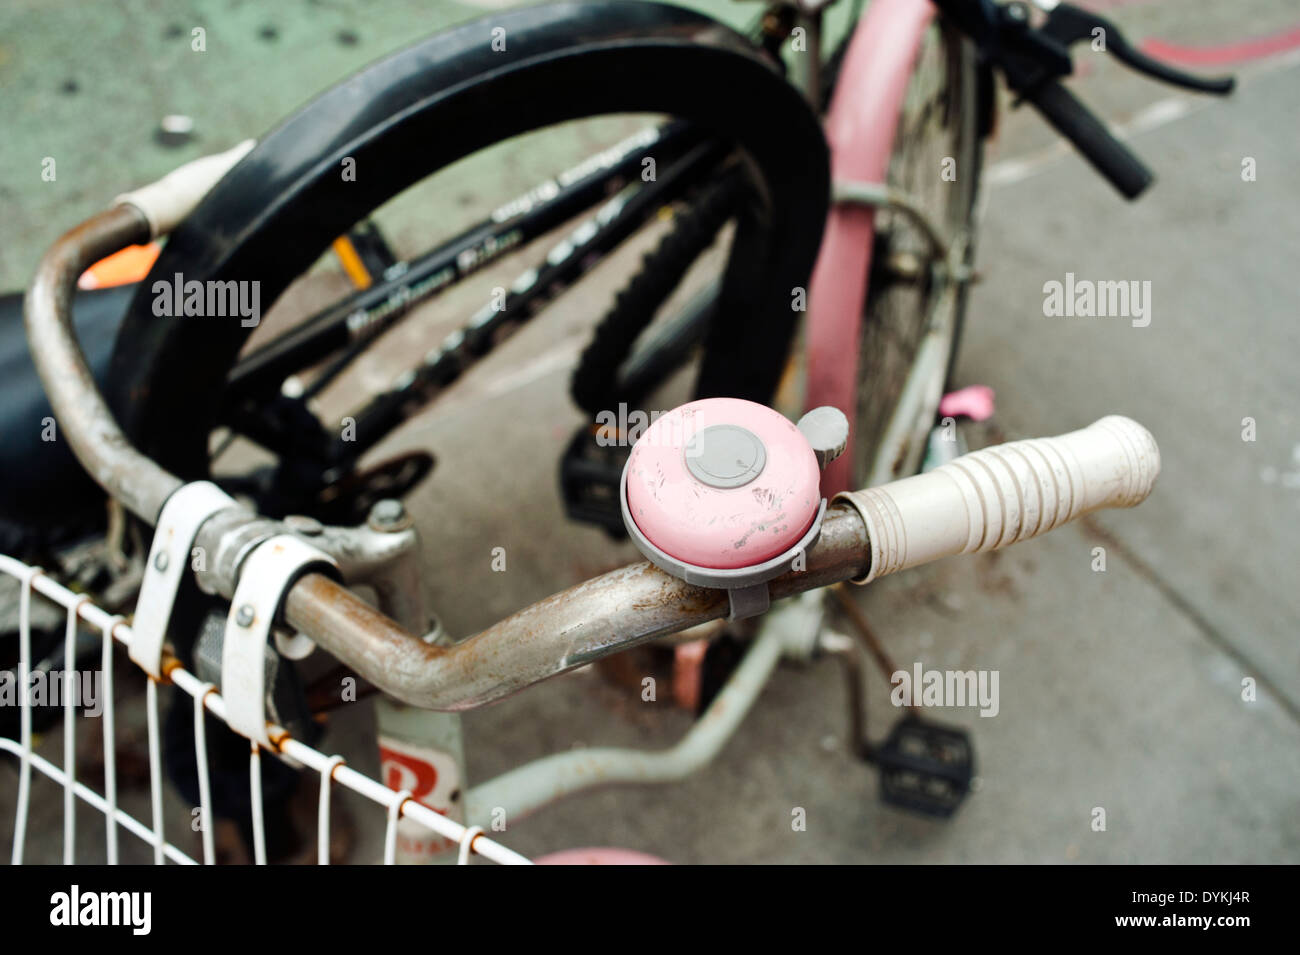 An old pink bicycle with matching pink bell Stock Photo